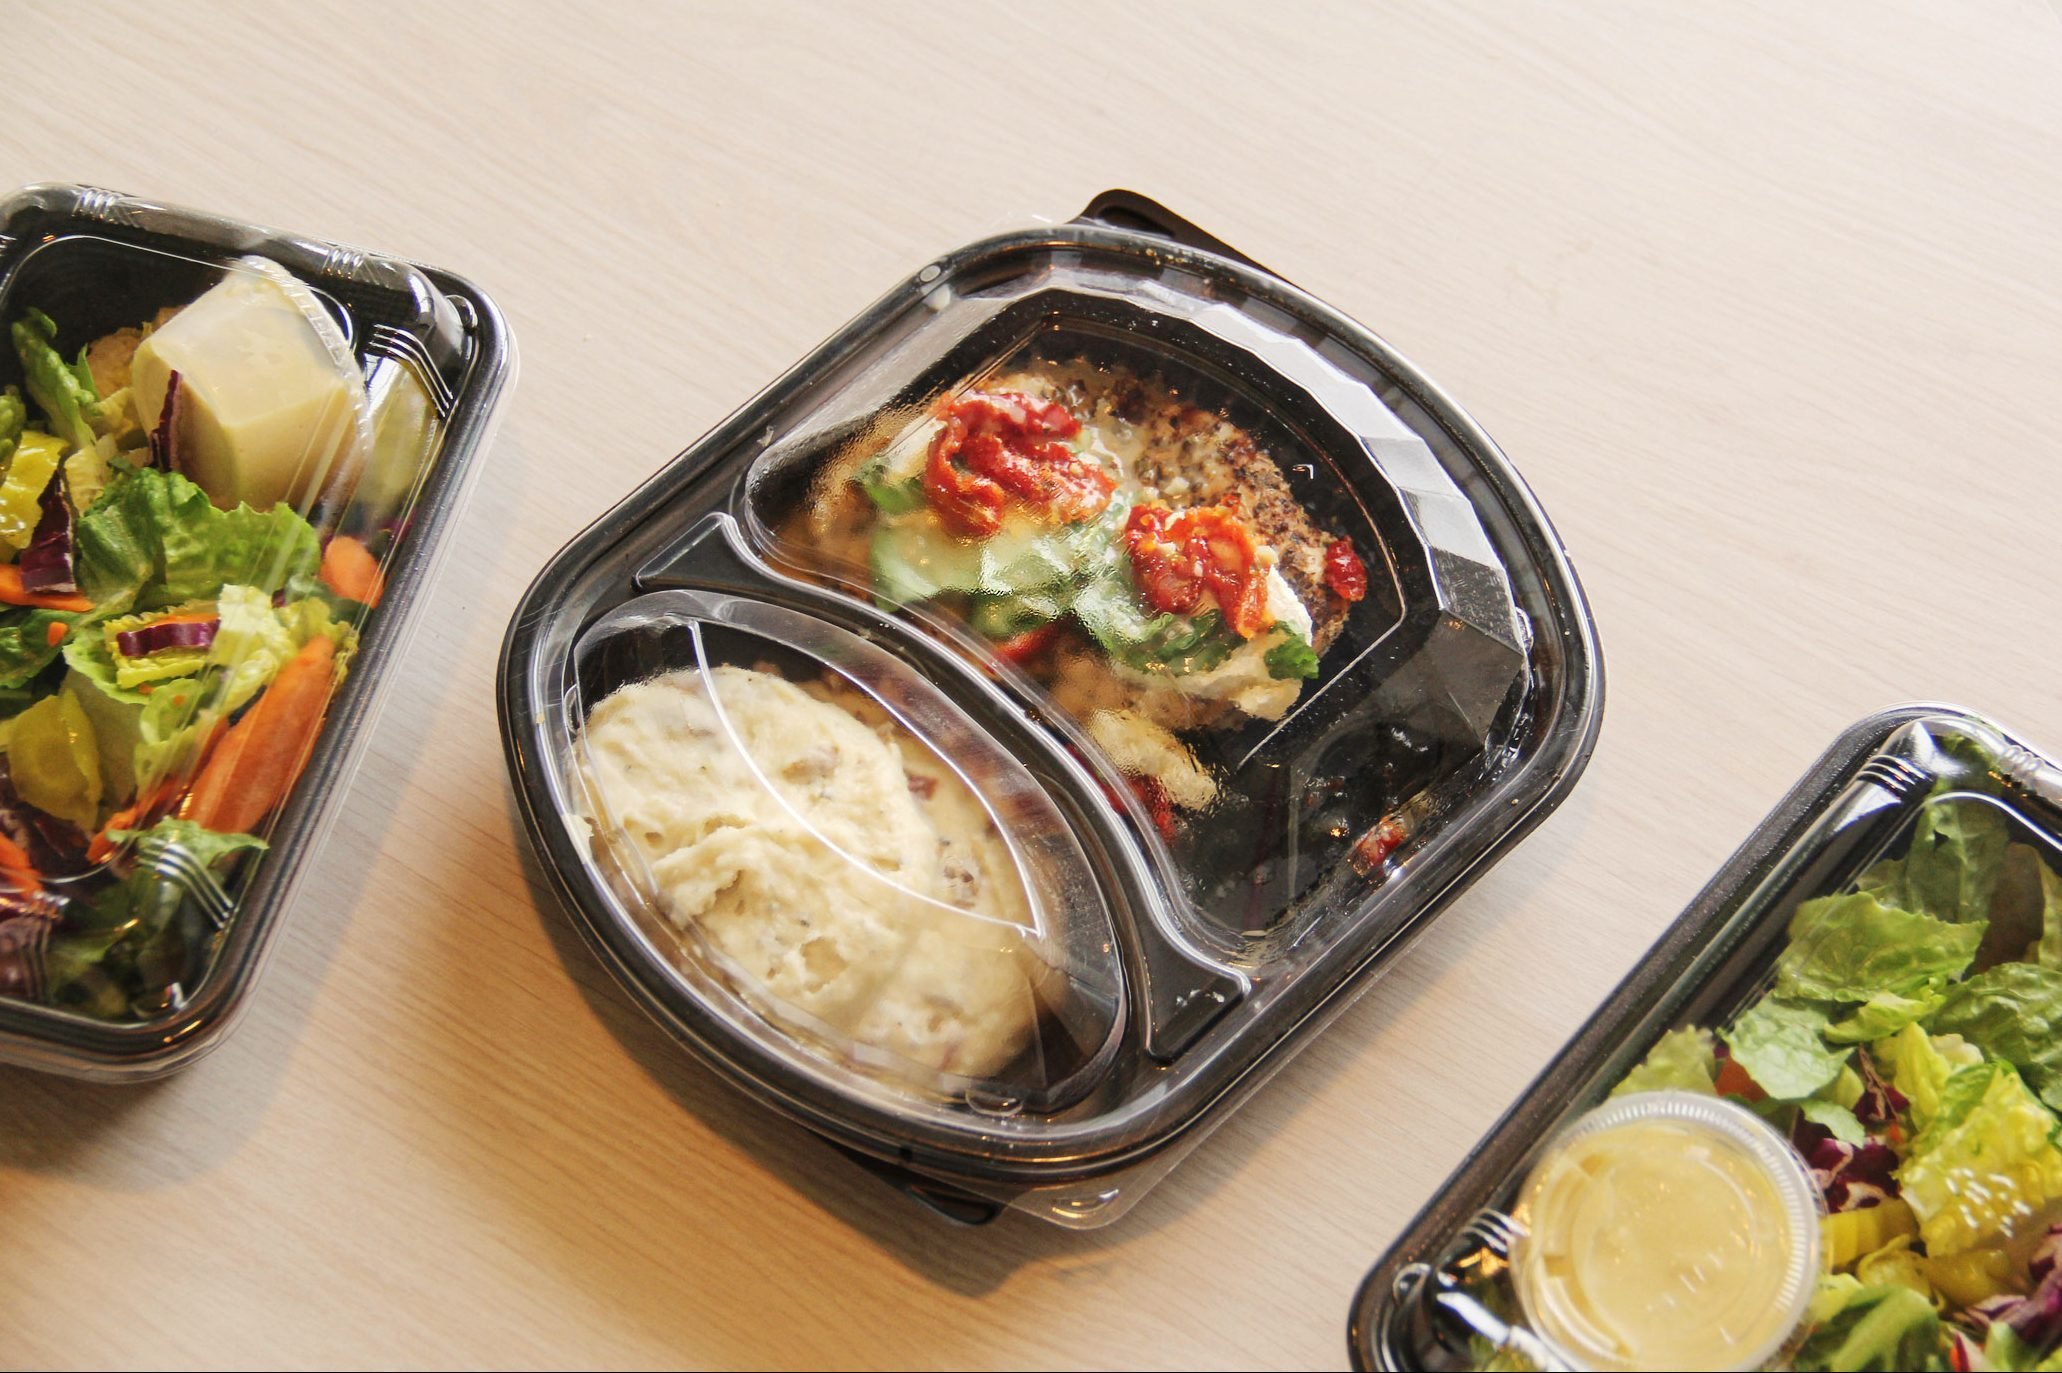 Plastic Takeout Containers, Takeout Containers